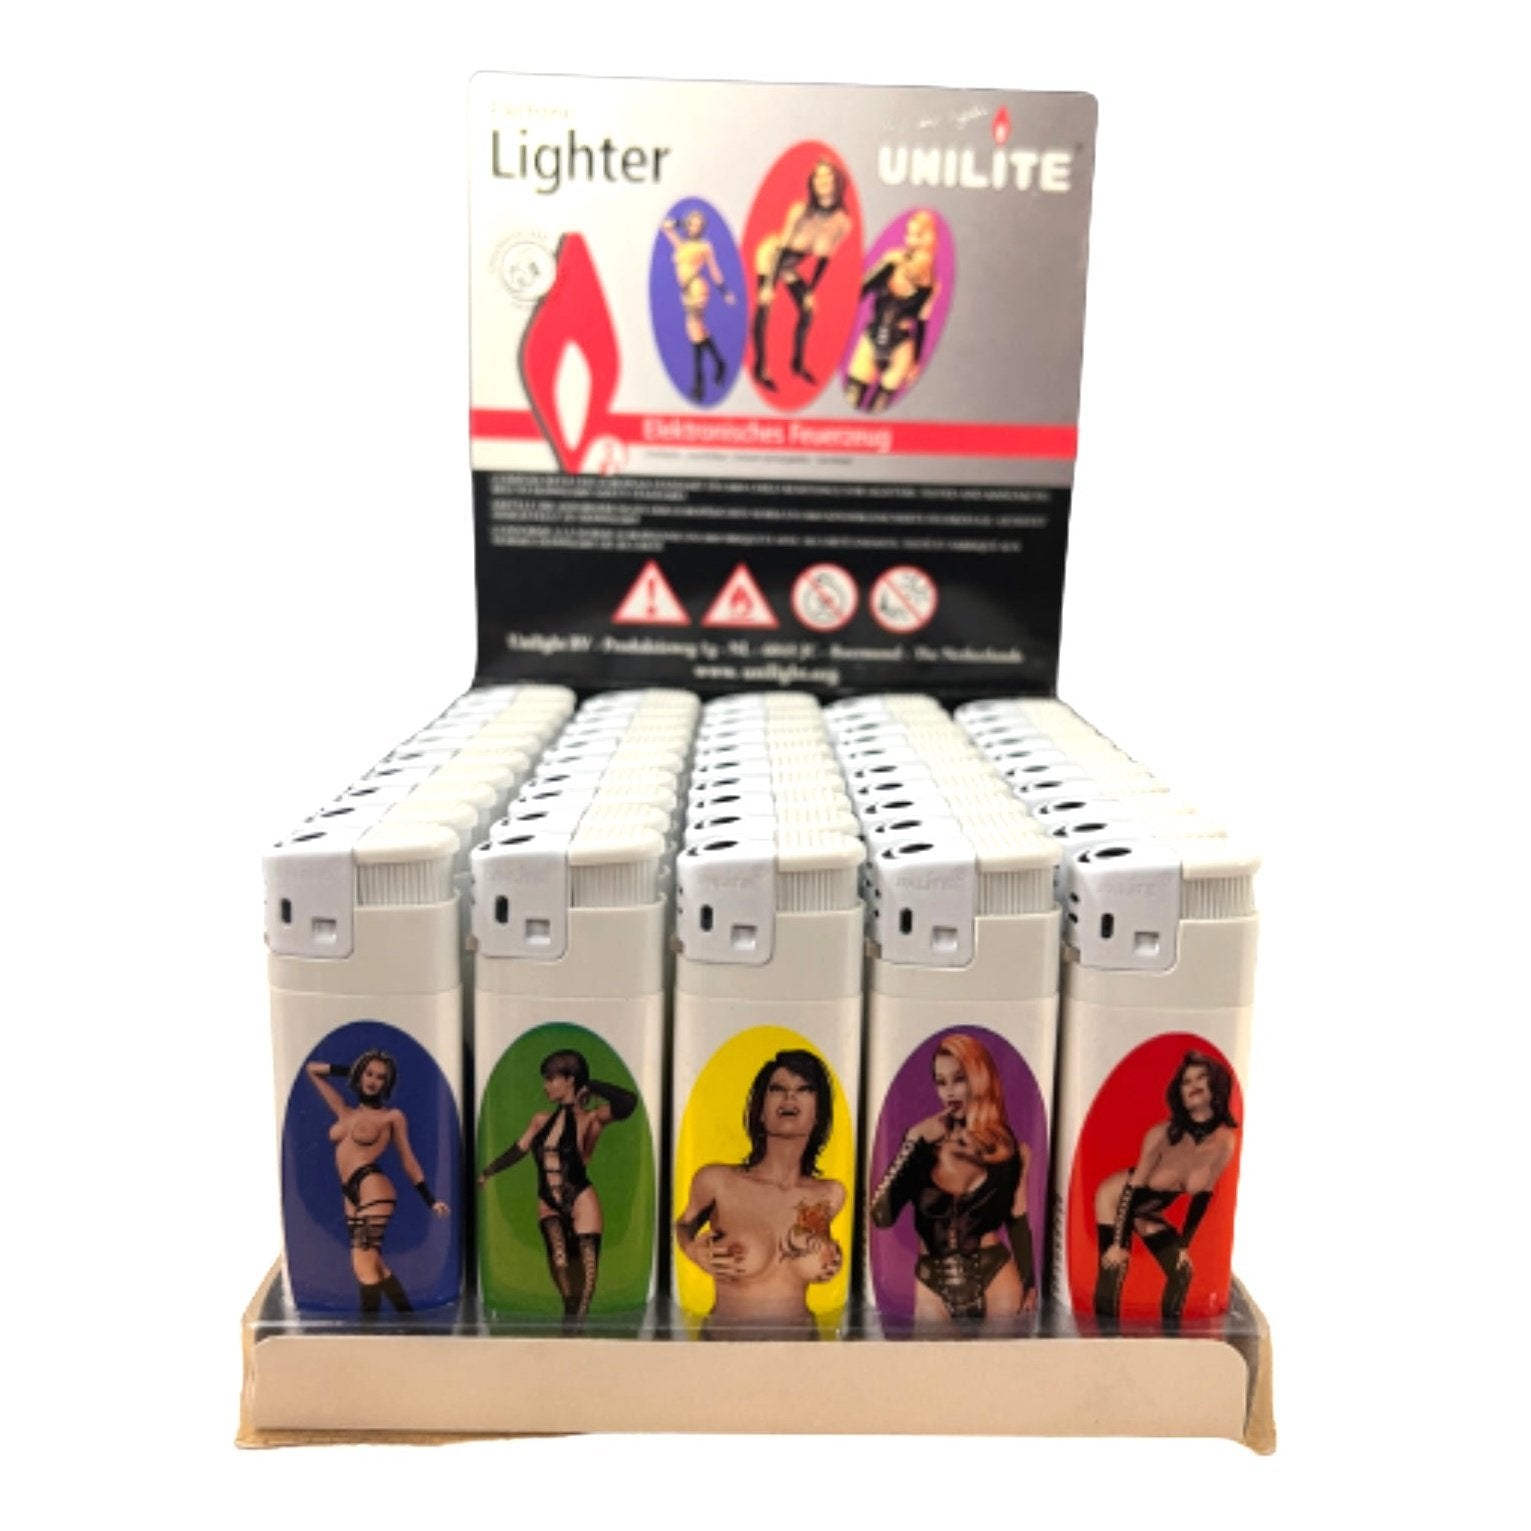 Sexy Ladies Electronic Lighters 50 Count Wholesale